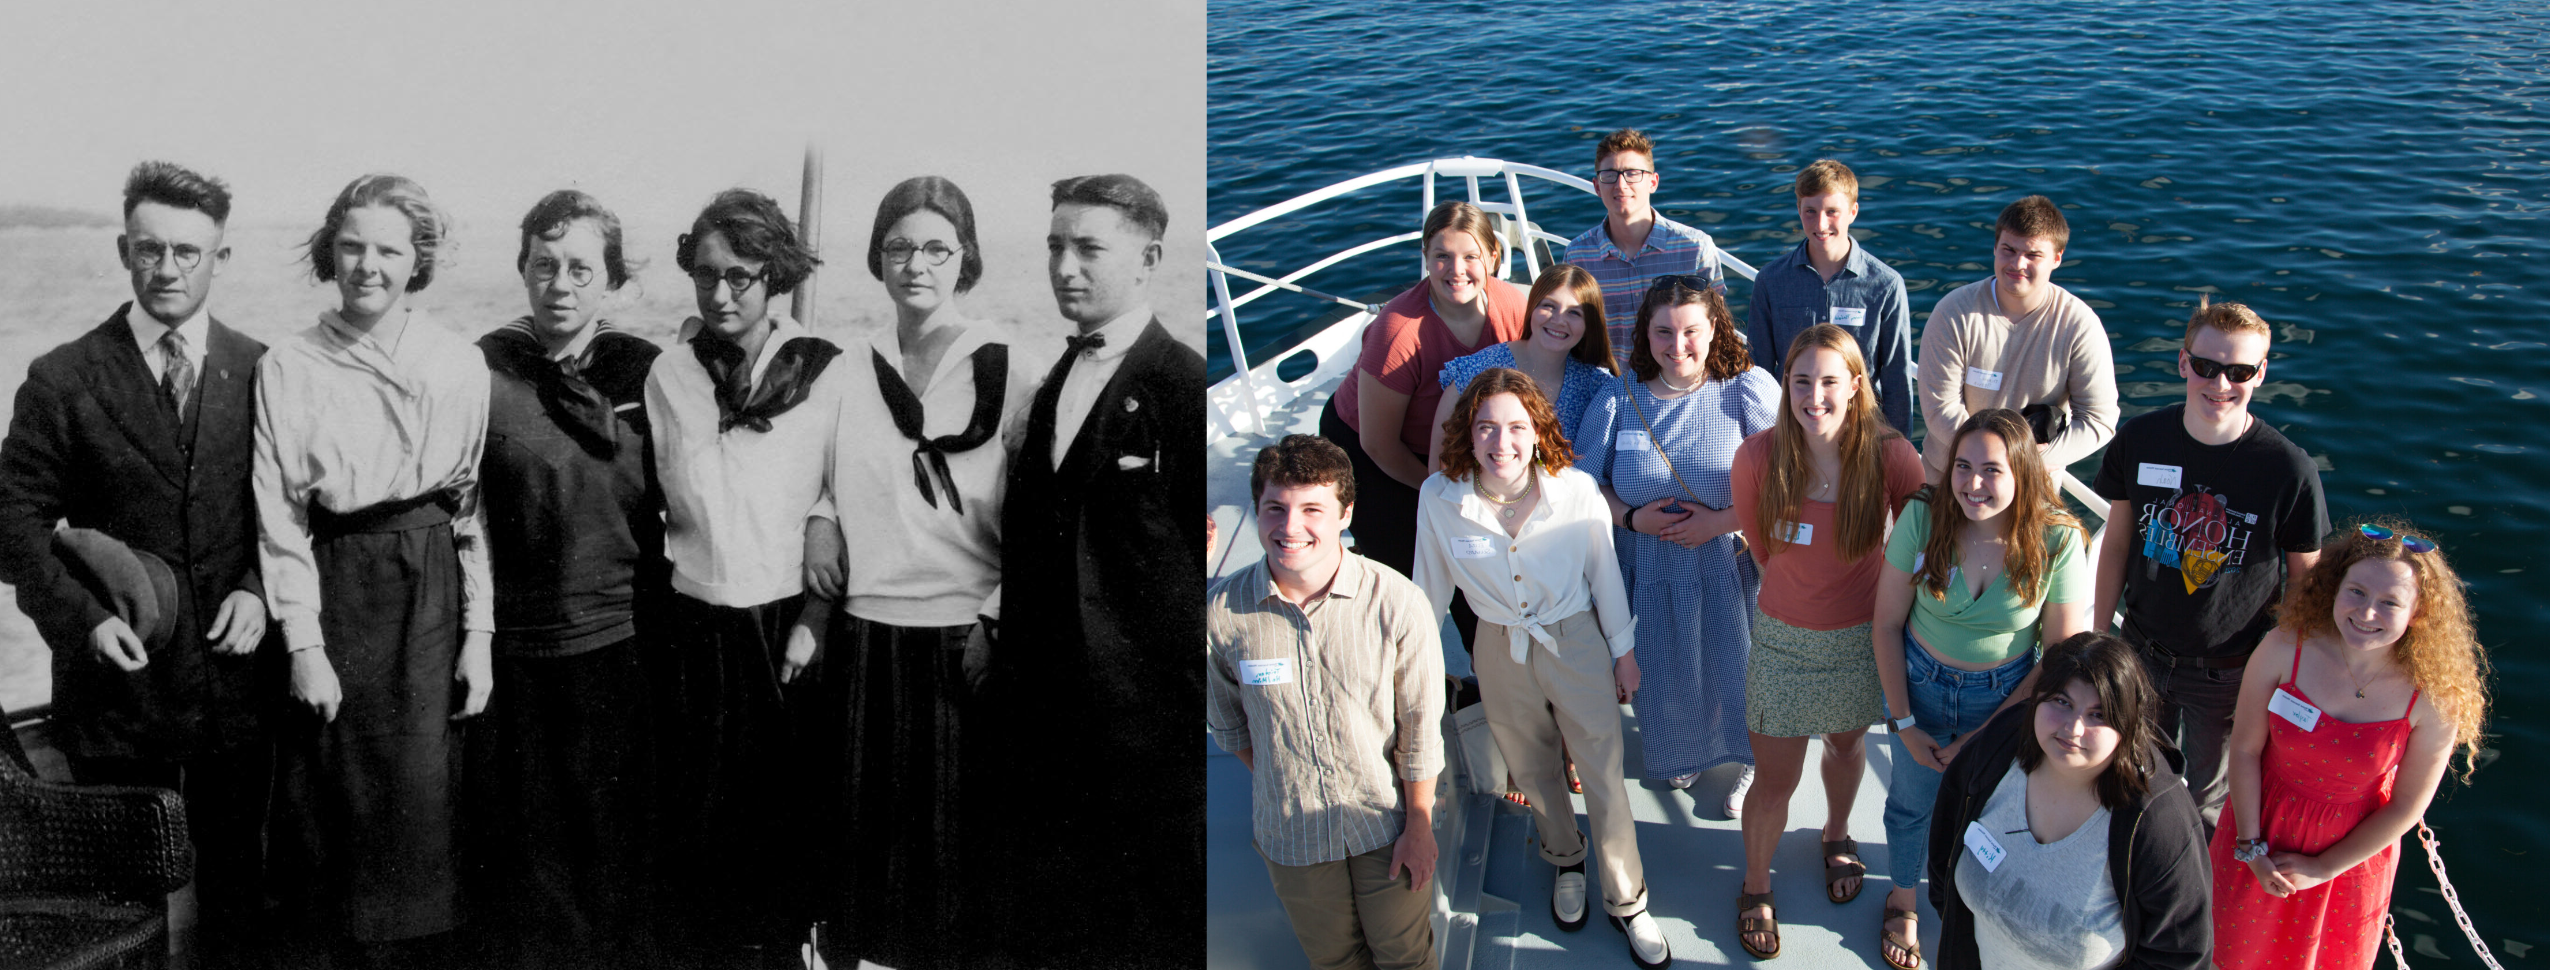 Two photos side by side. The first is a black and white photo of students in the 1900s on the bow of a boat. The second is a similar color photo in 2022